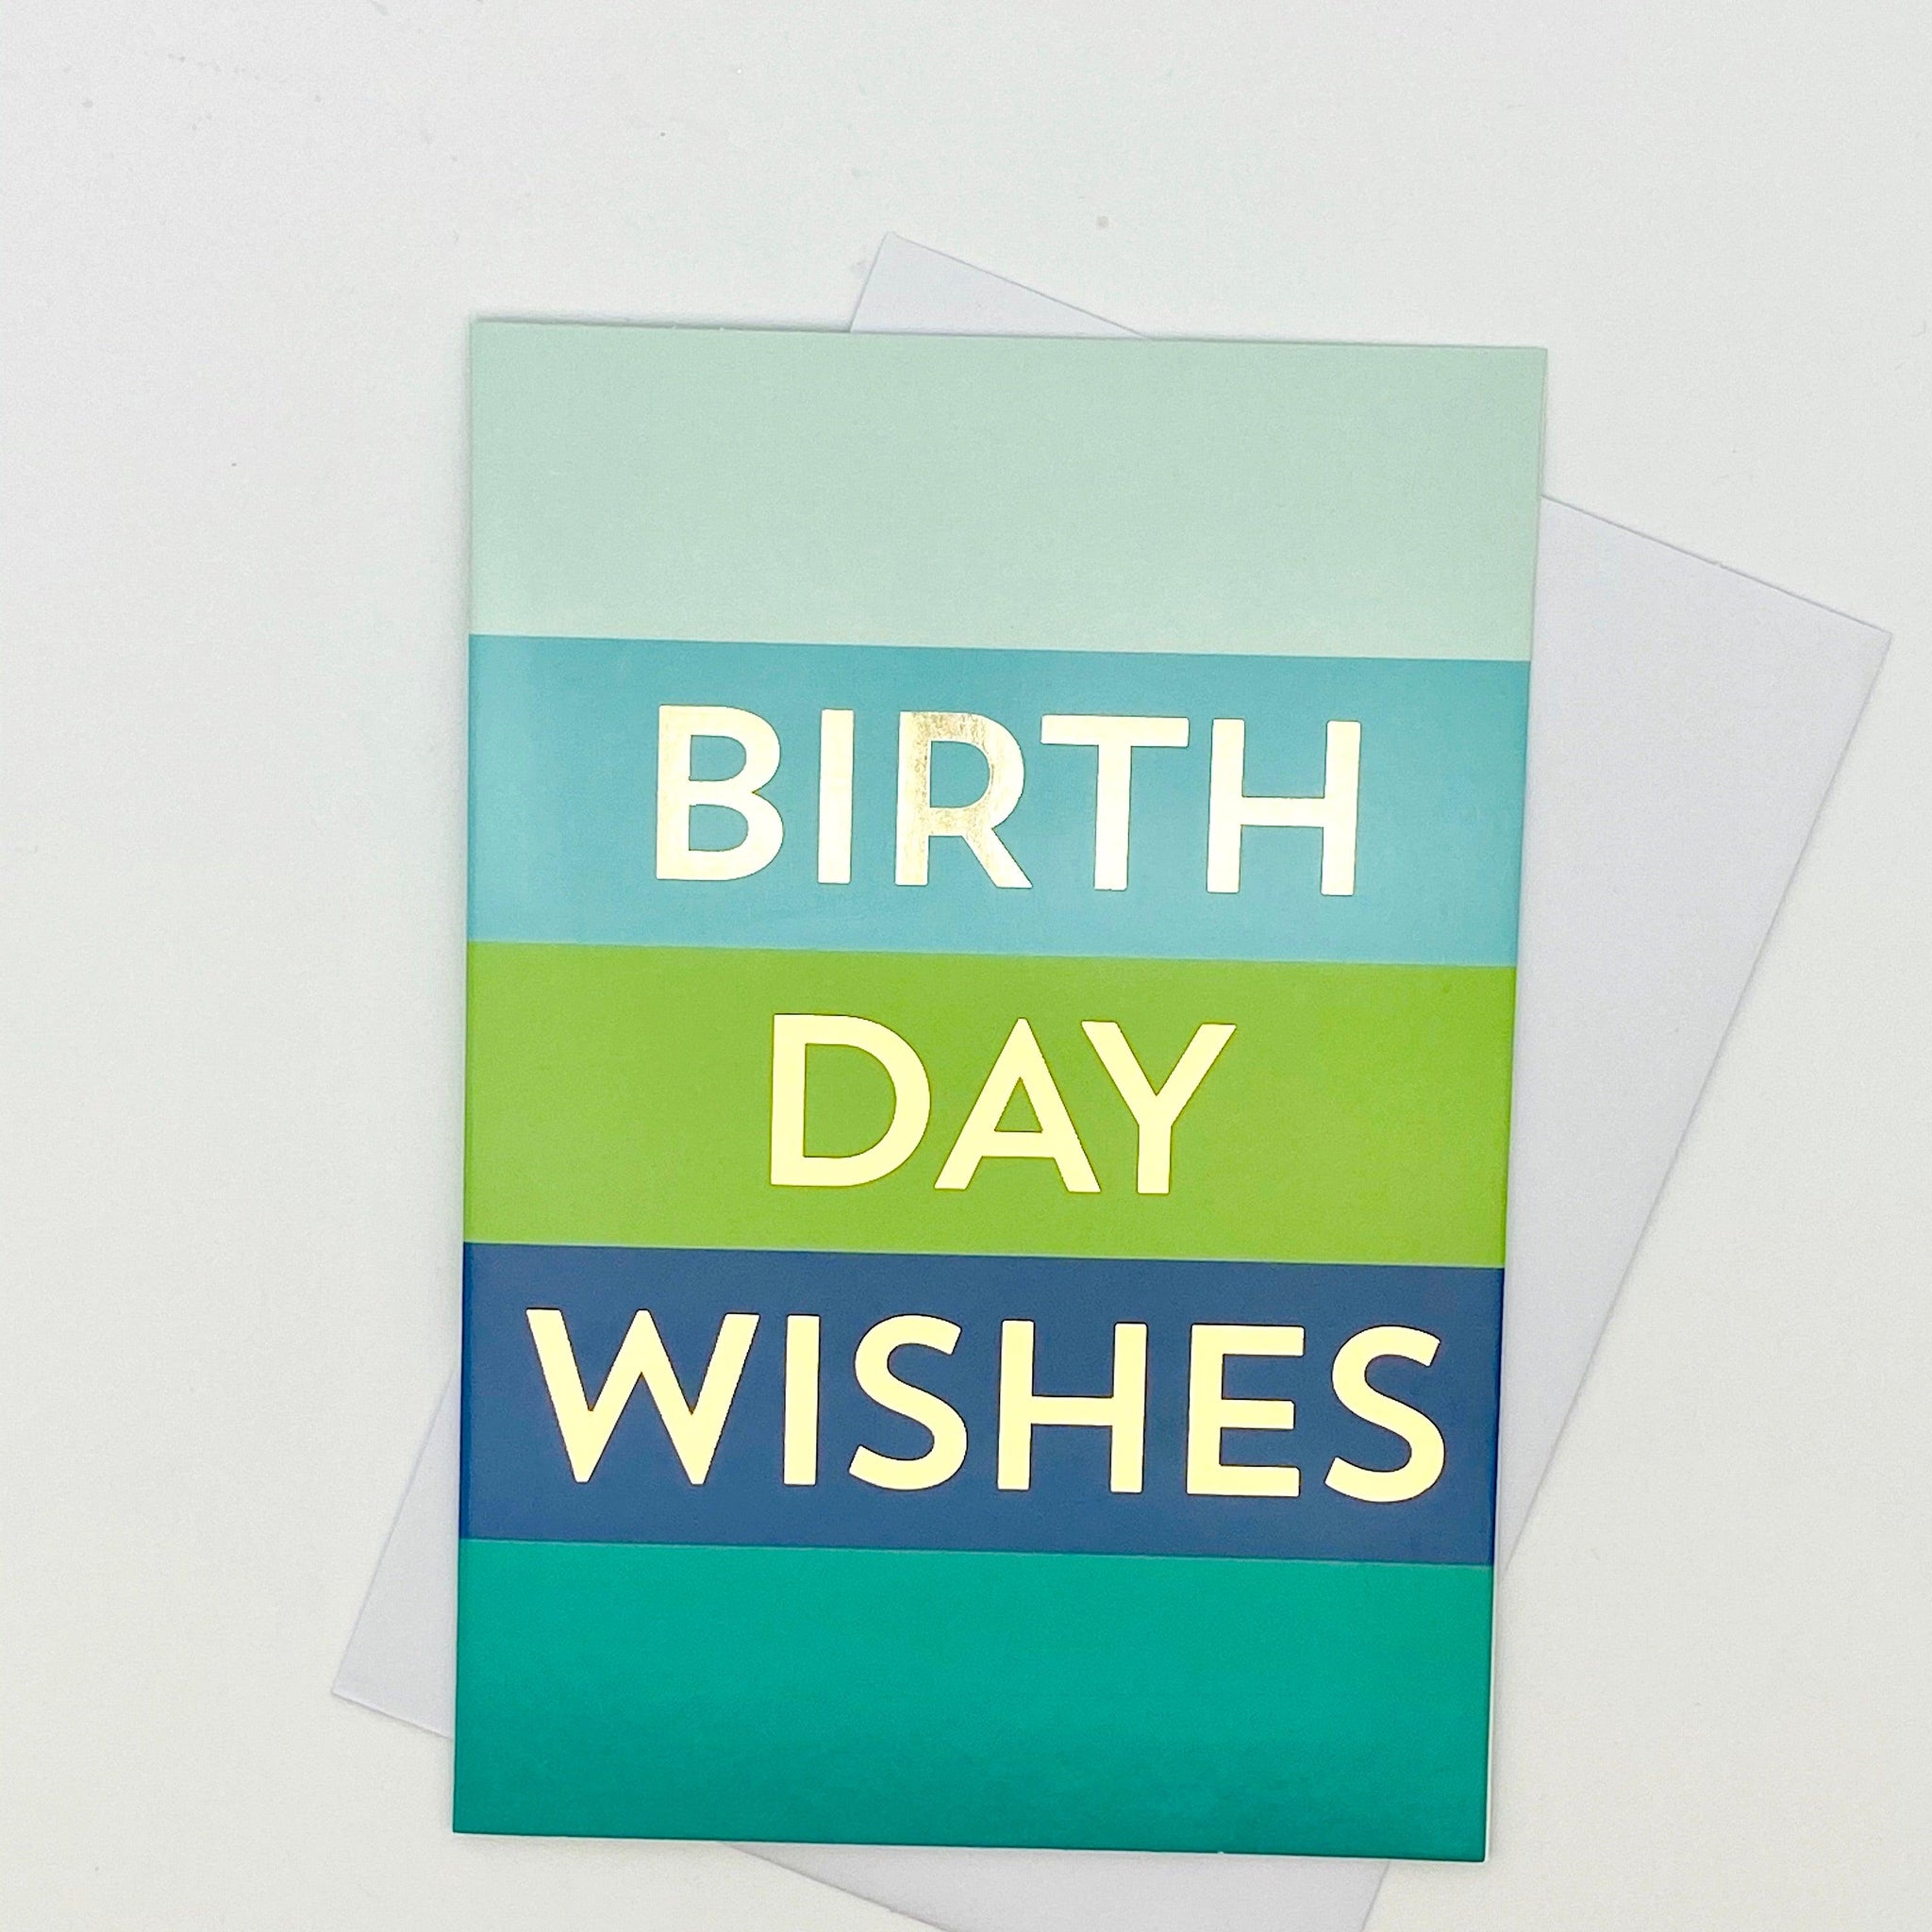 Occasion Card - BIRTHDAY WISHES My Little Shoppe